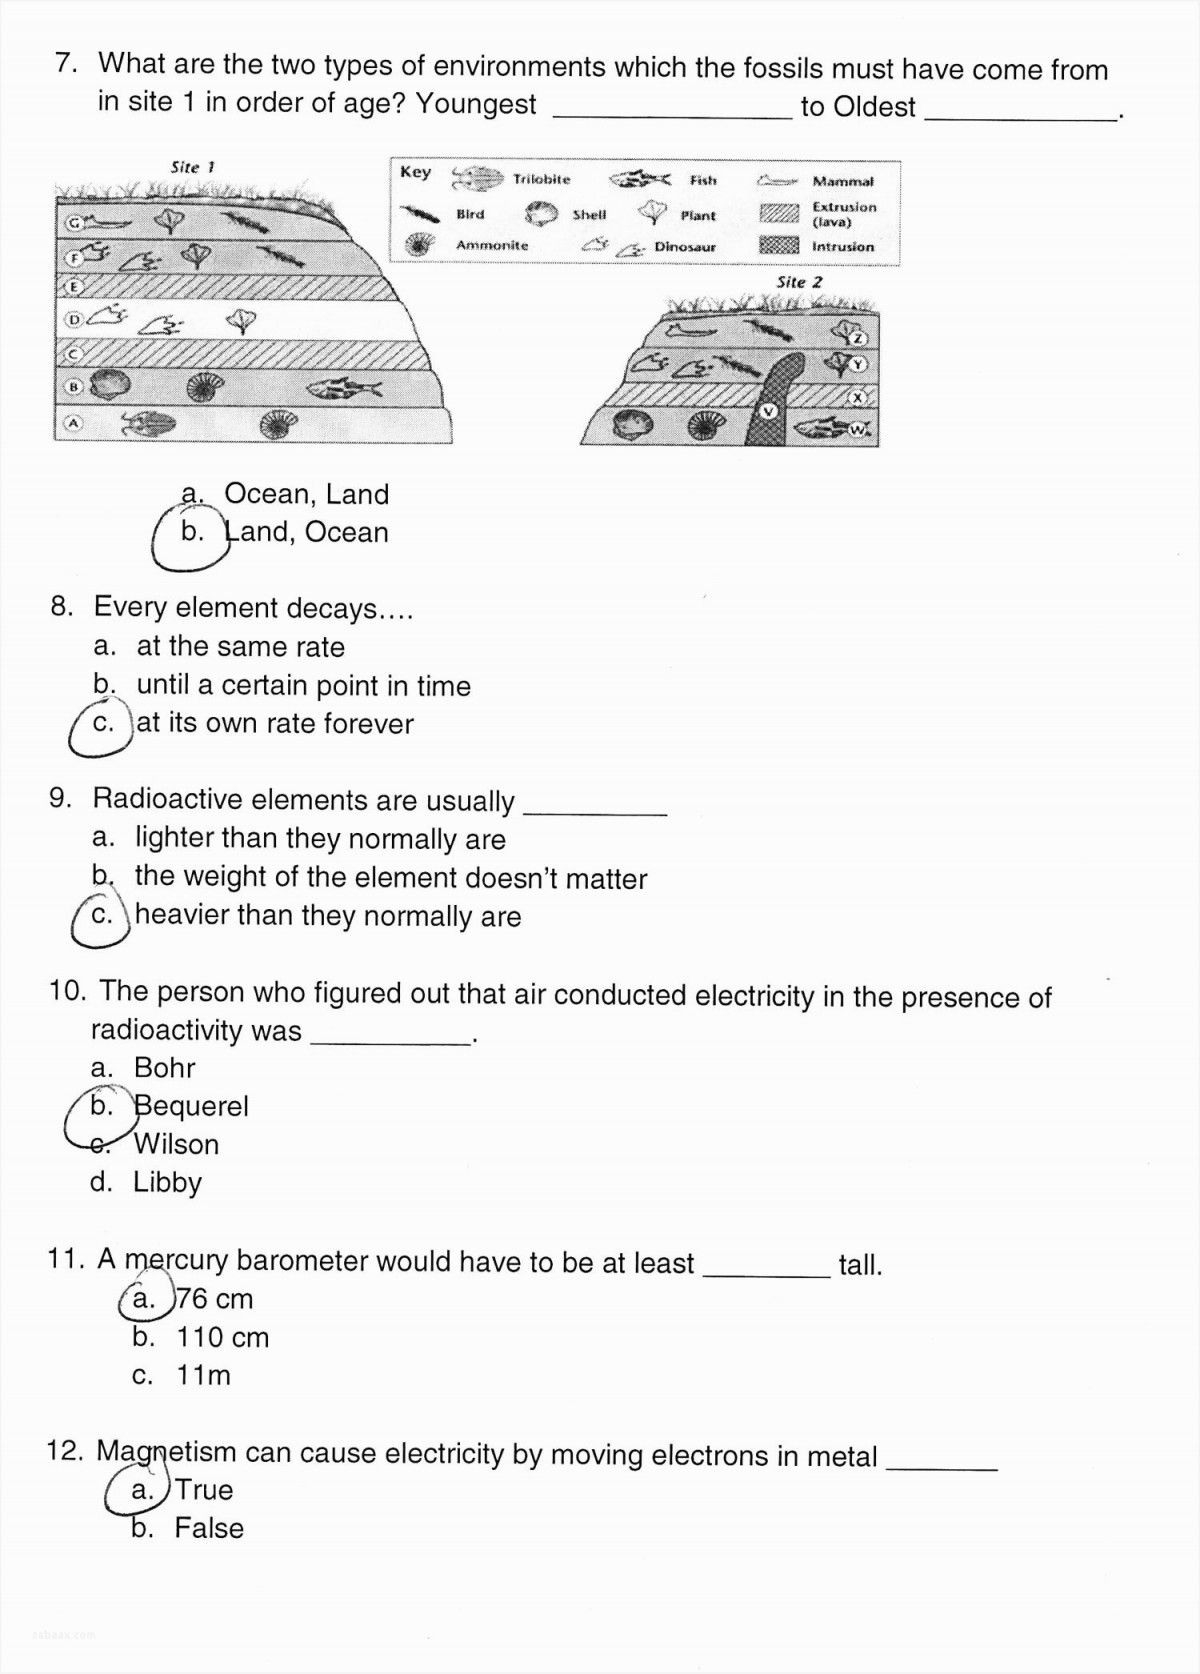 relative-ages-of-rocks-worksheet-answers-db-excel